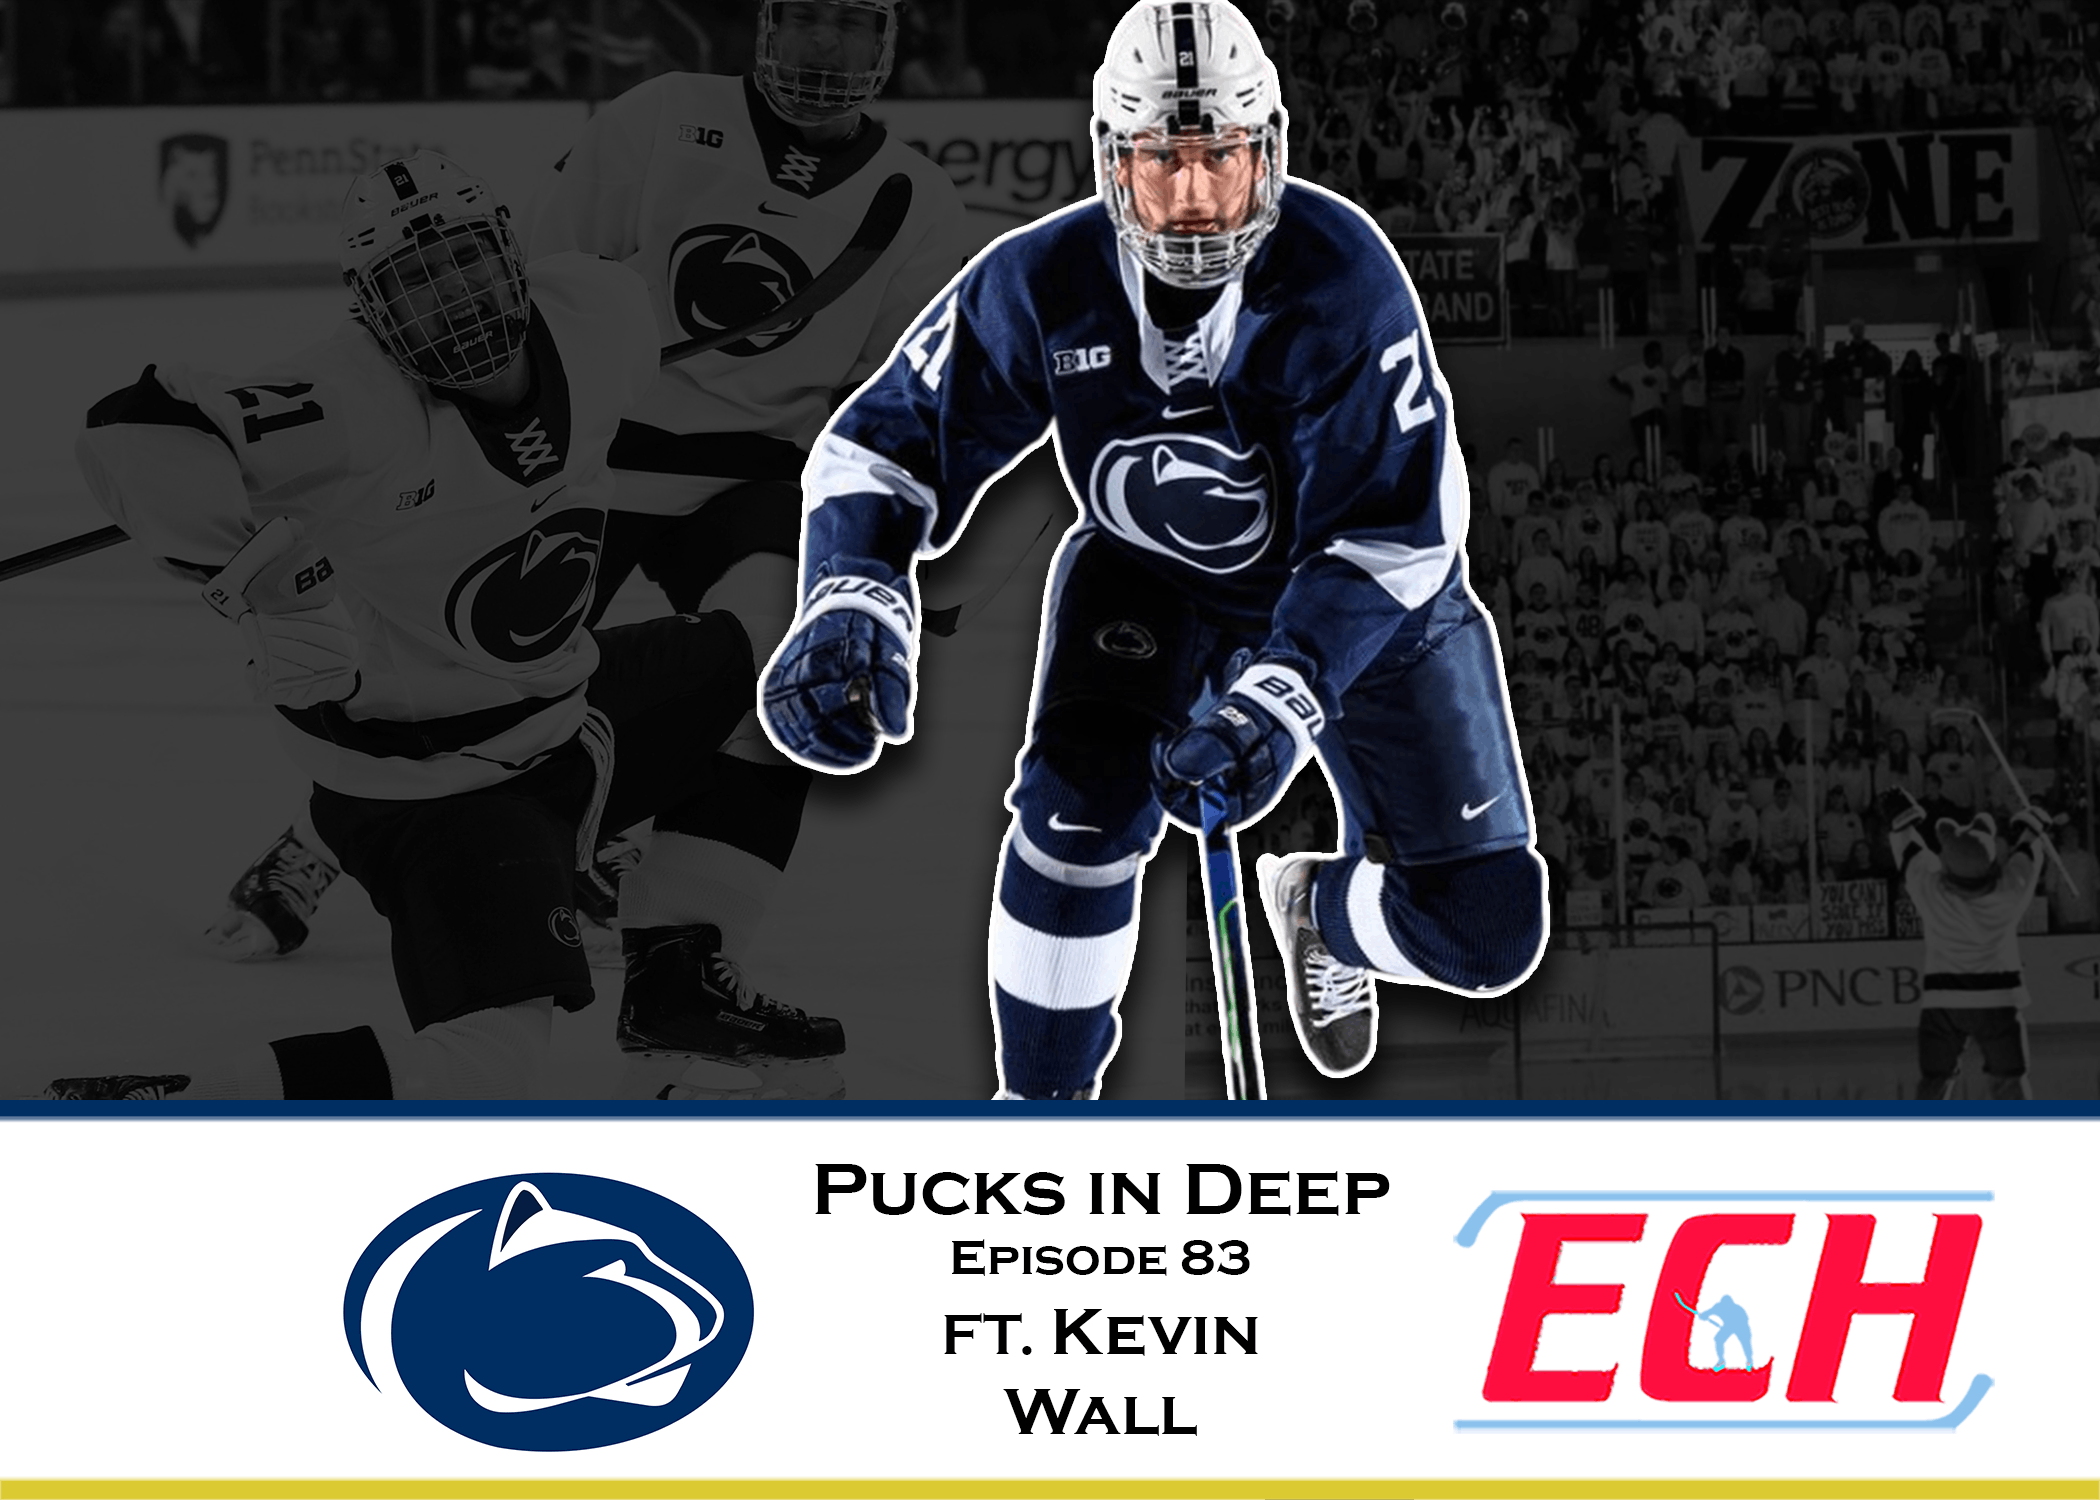 Episode #83 of Pucks in Deep Feat: Kevin Wall